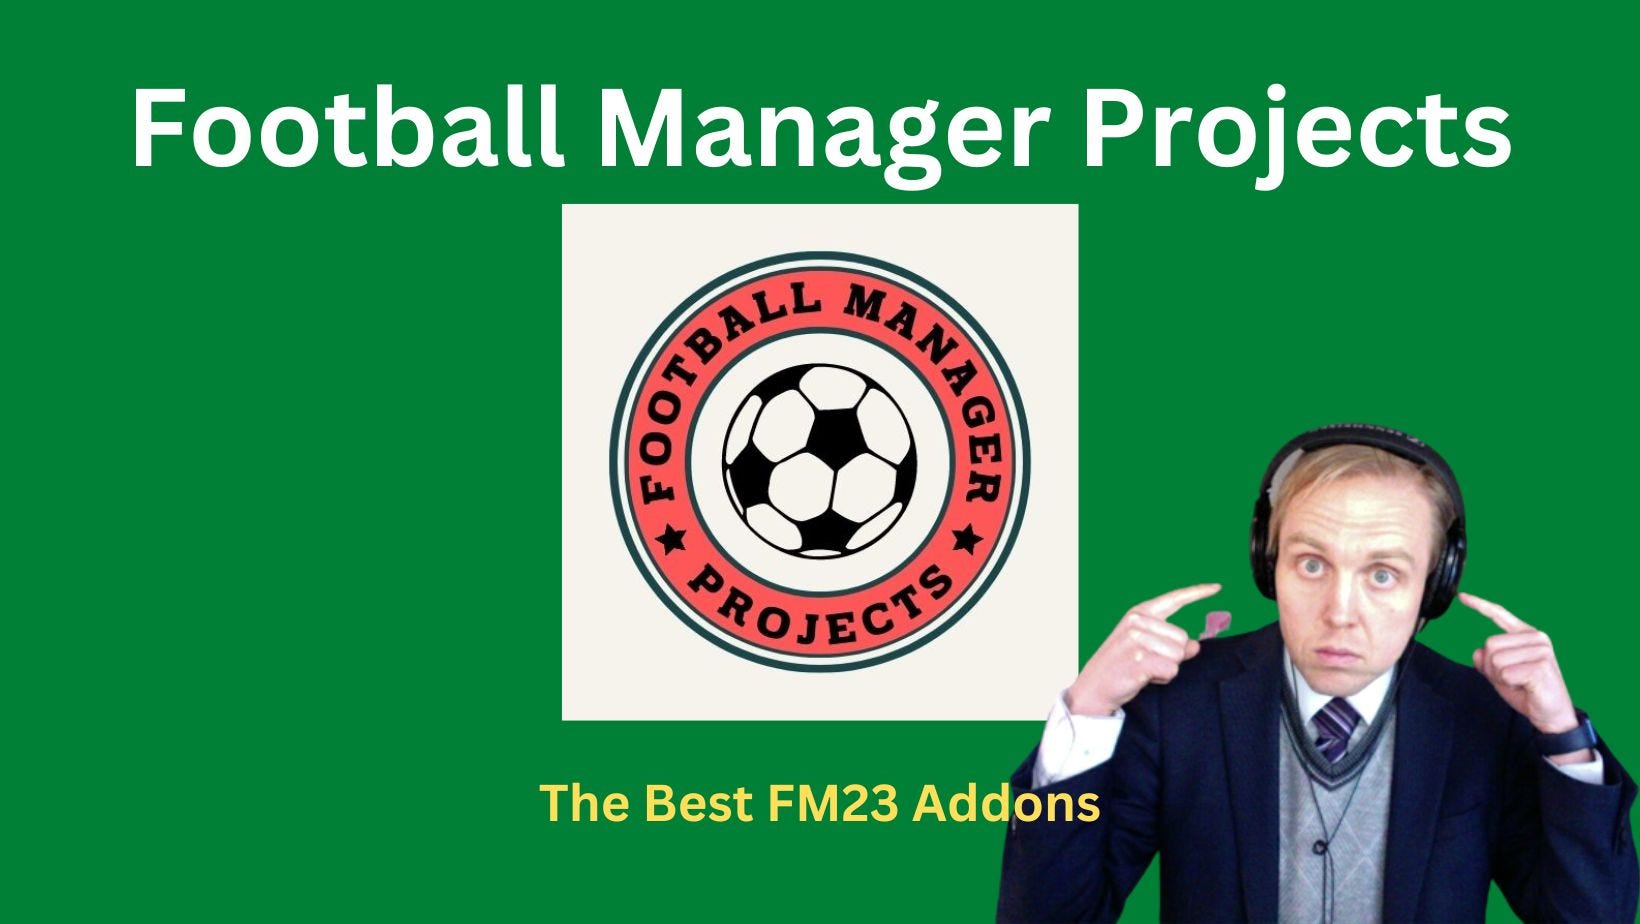 FM23 is FREE now - HOW TO GET IT! 